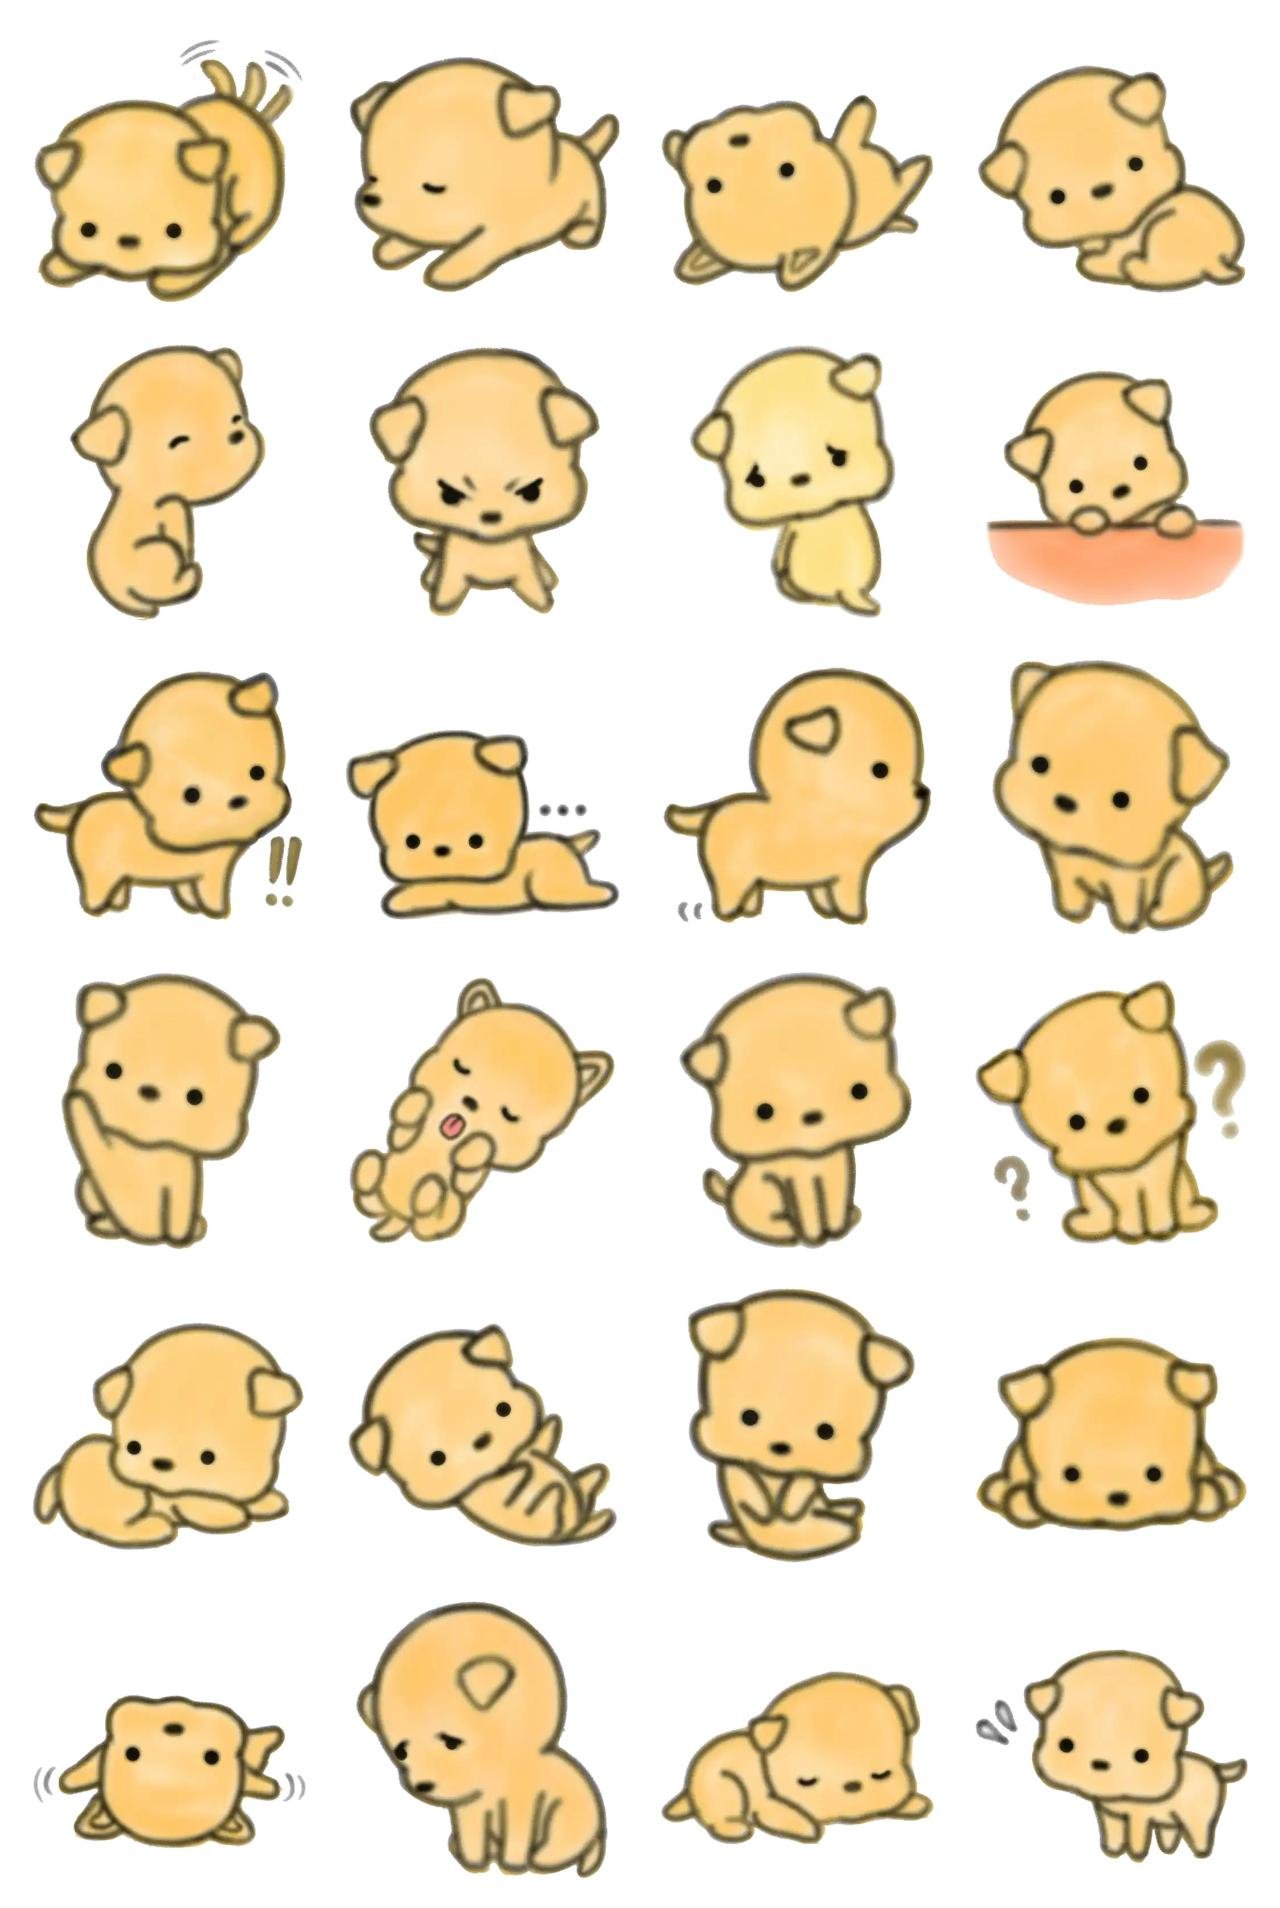 Mongmong Animals sticker pack for Whatsapp, Telegram, Signal, and others chatting and message apps